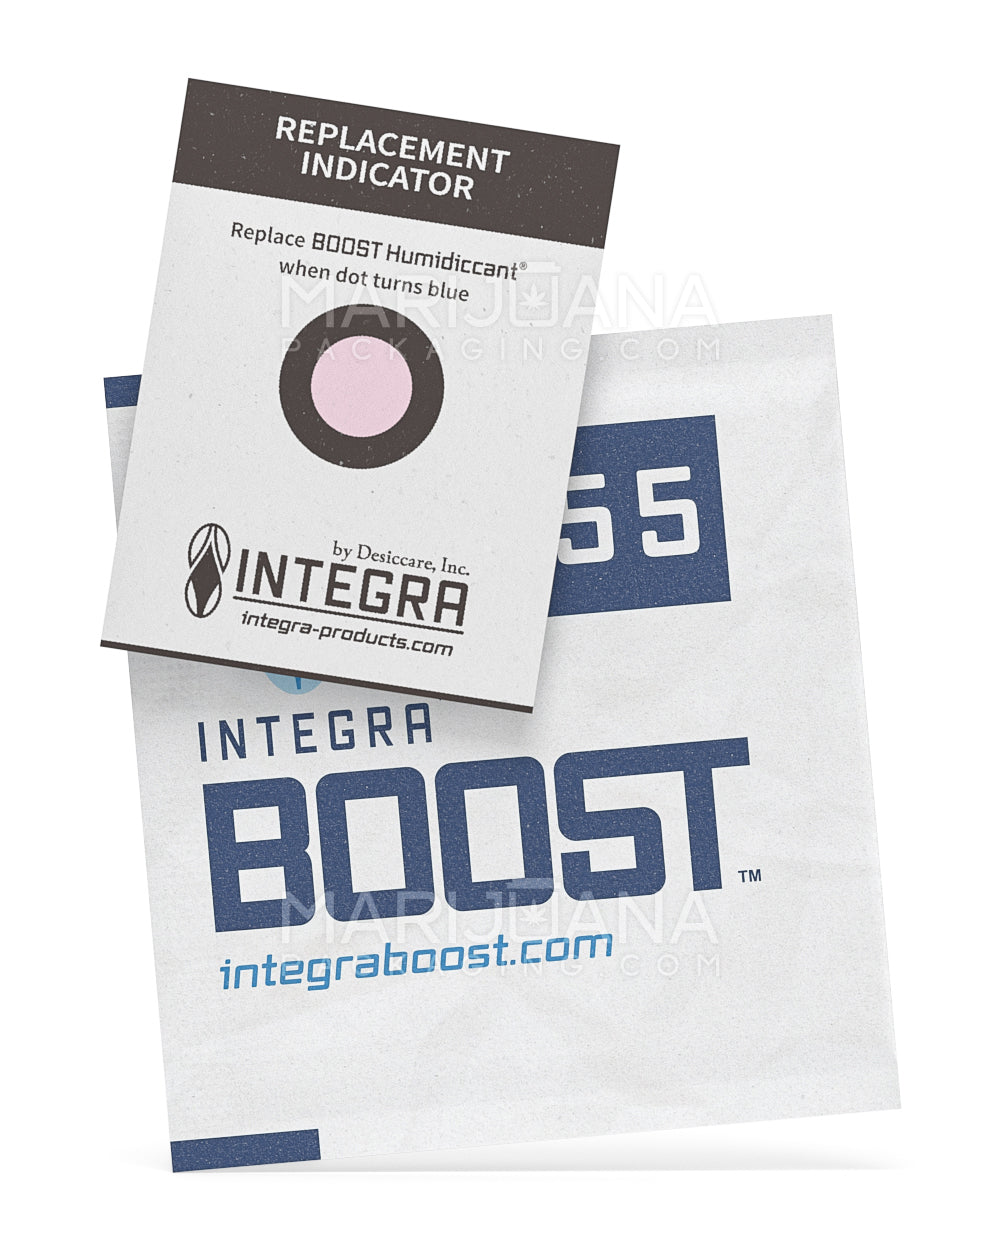 INTEGRA | Boost Humidity Pack | 8 Grams - 55% - 50 Count - 5